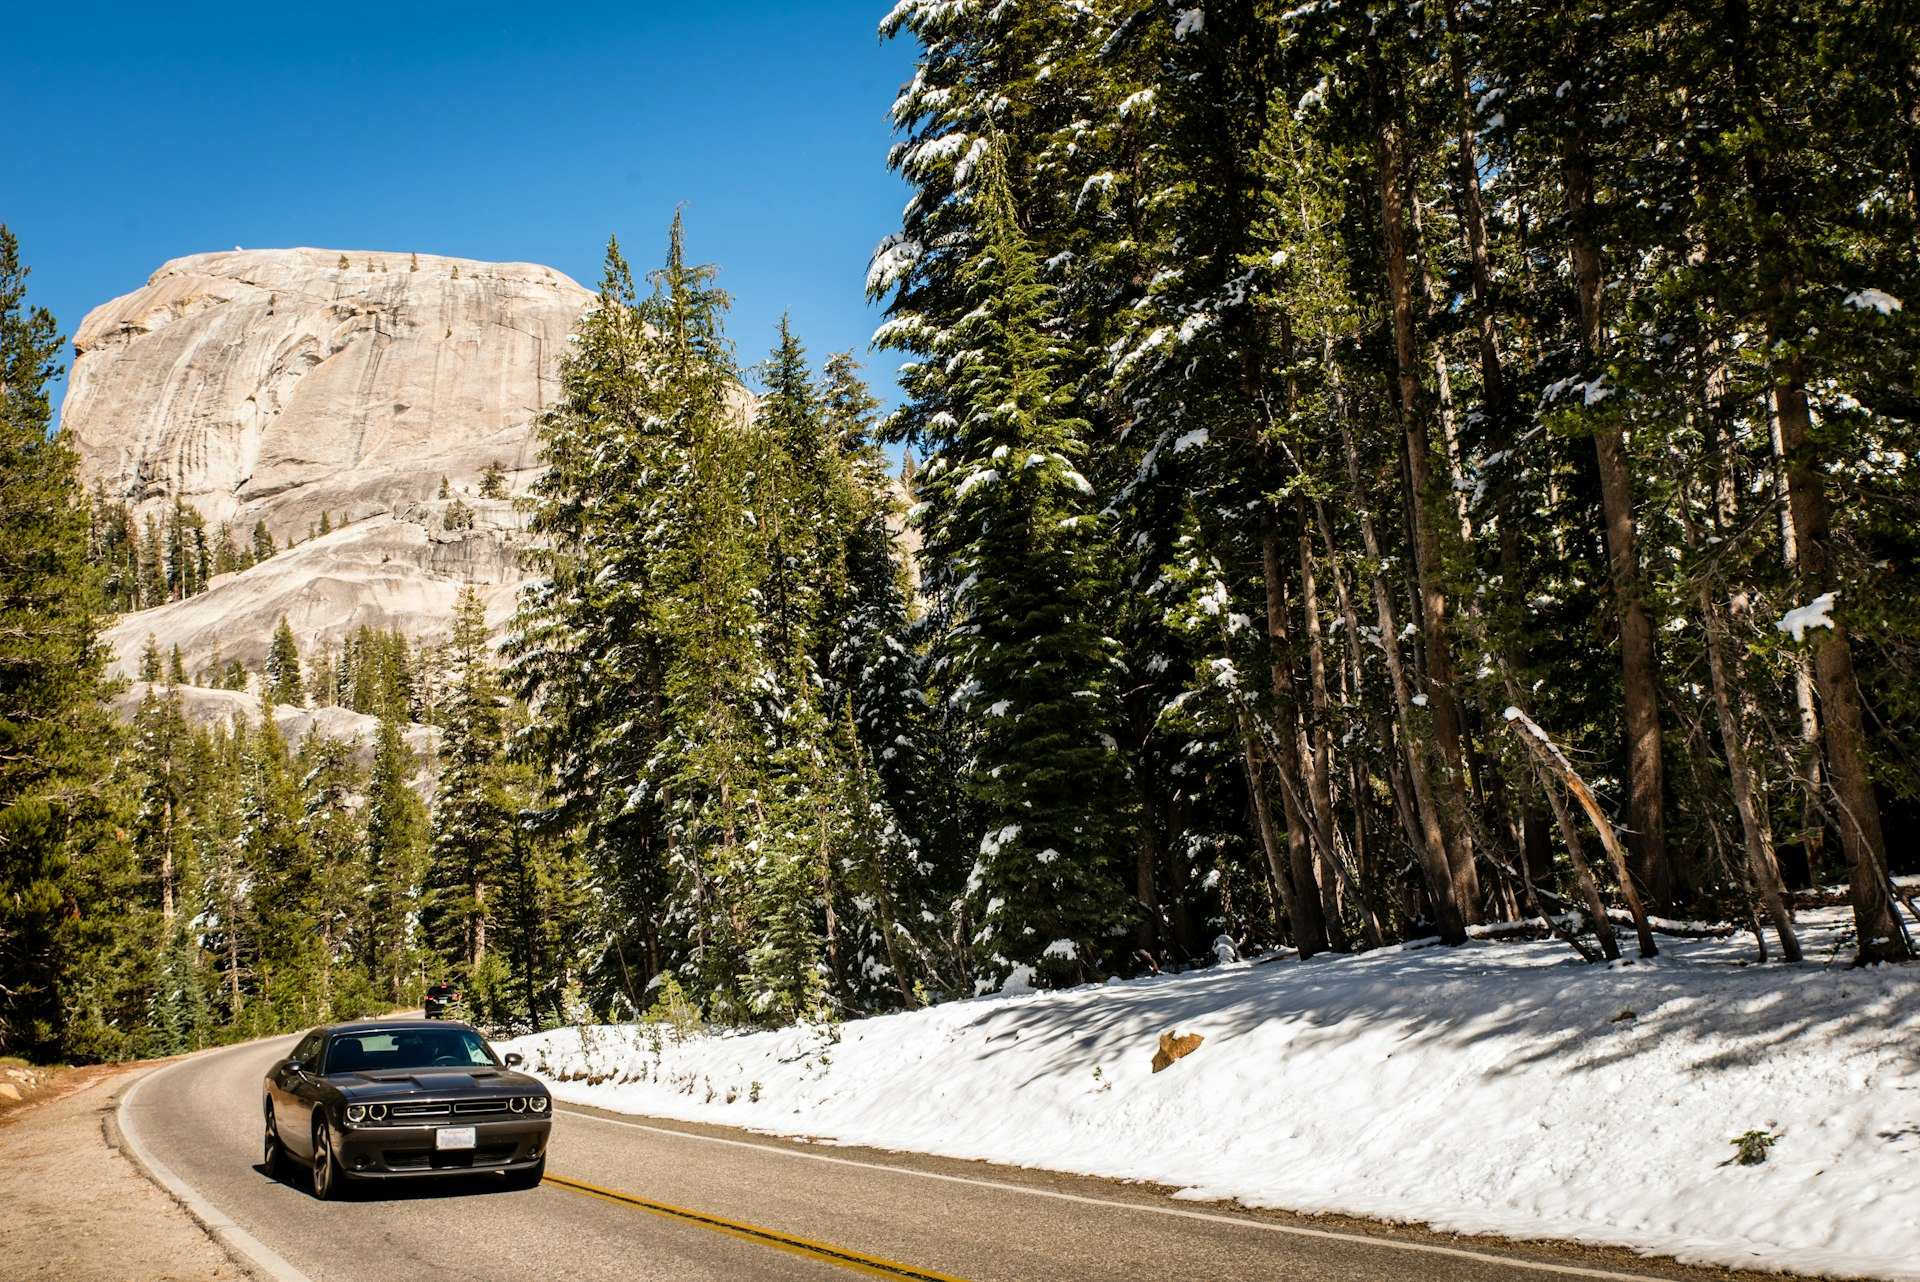 Car and mountain scenery on Tioga Pass road in Yosemite National Park